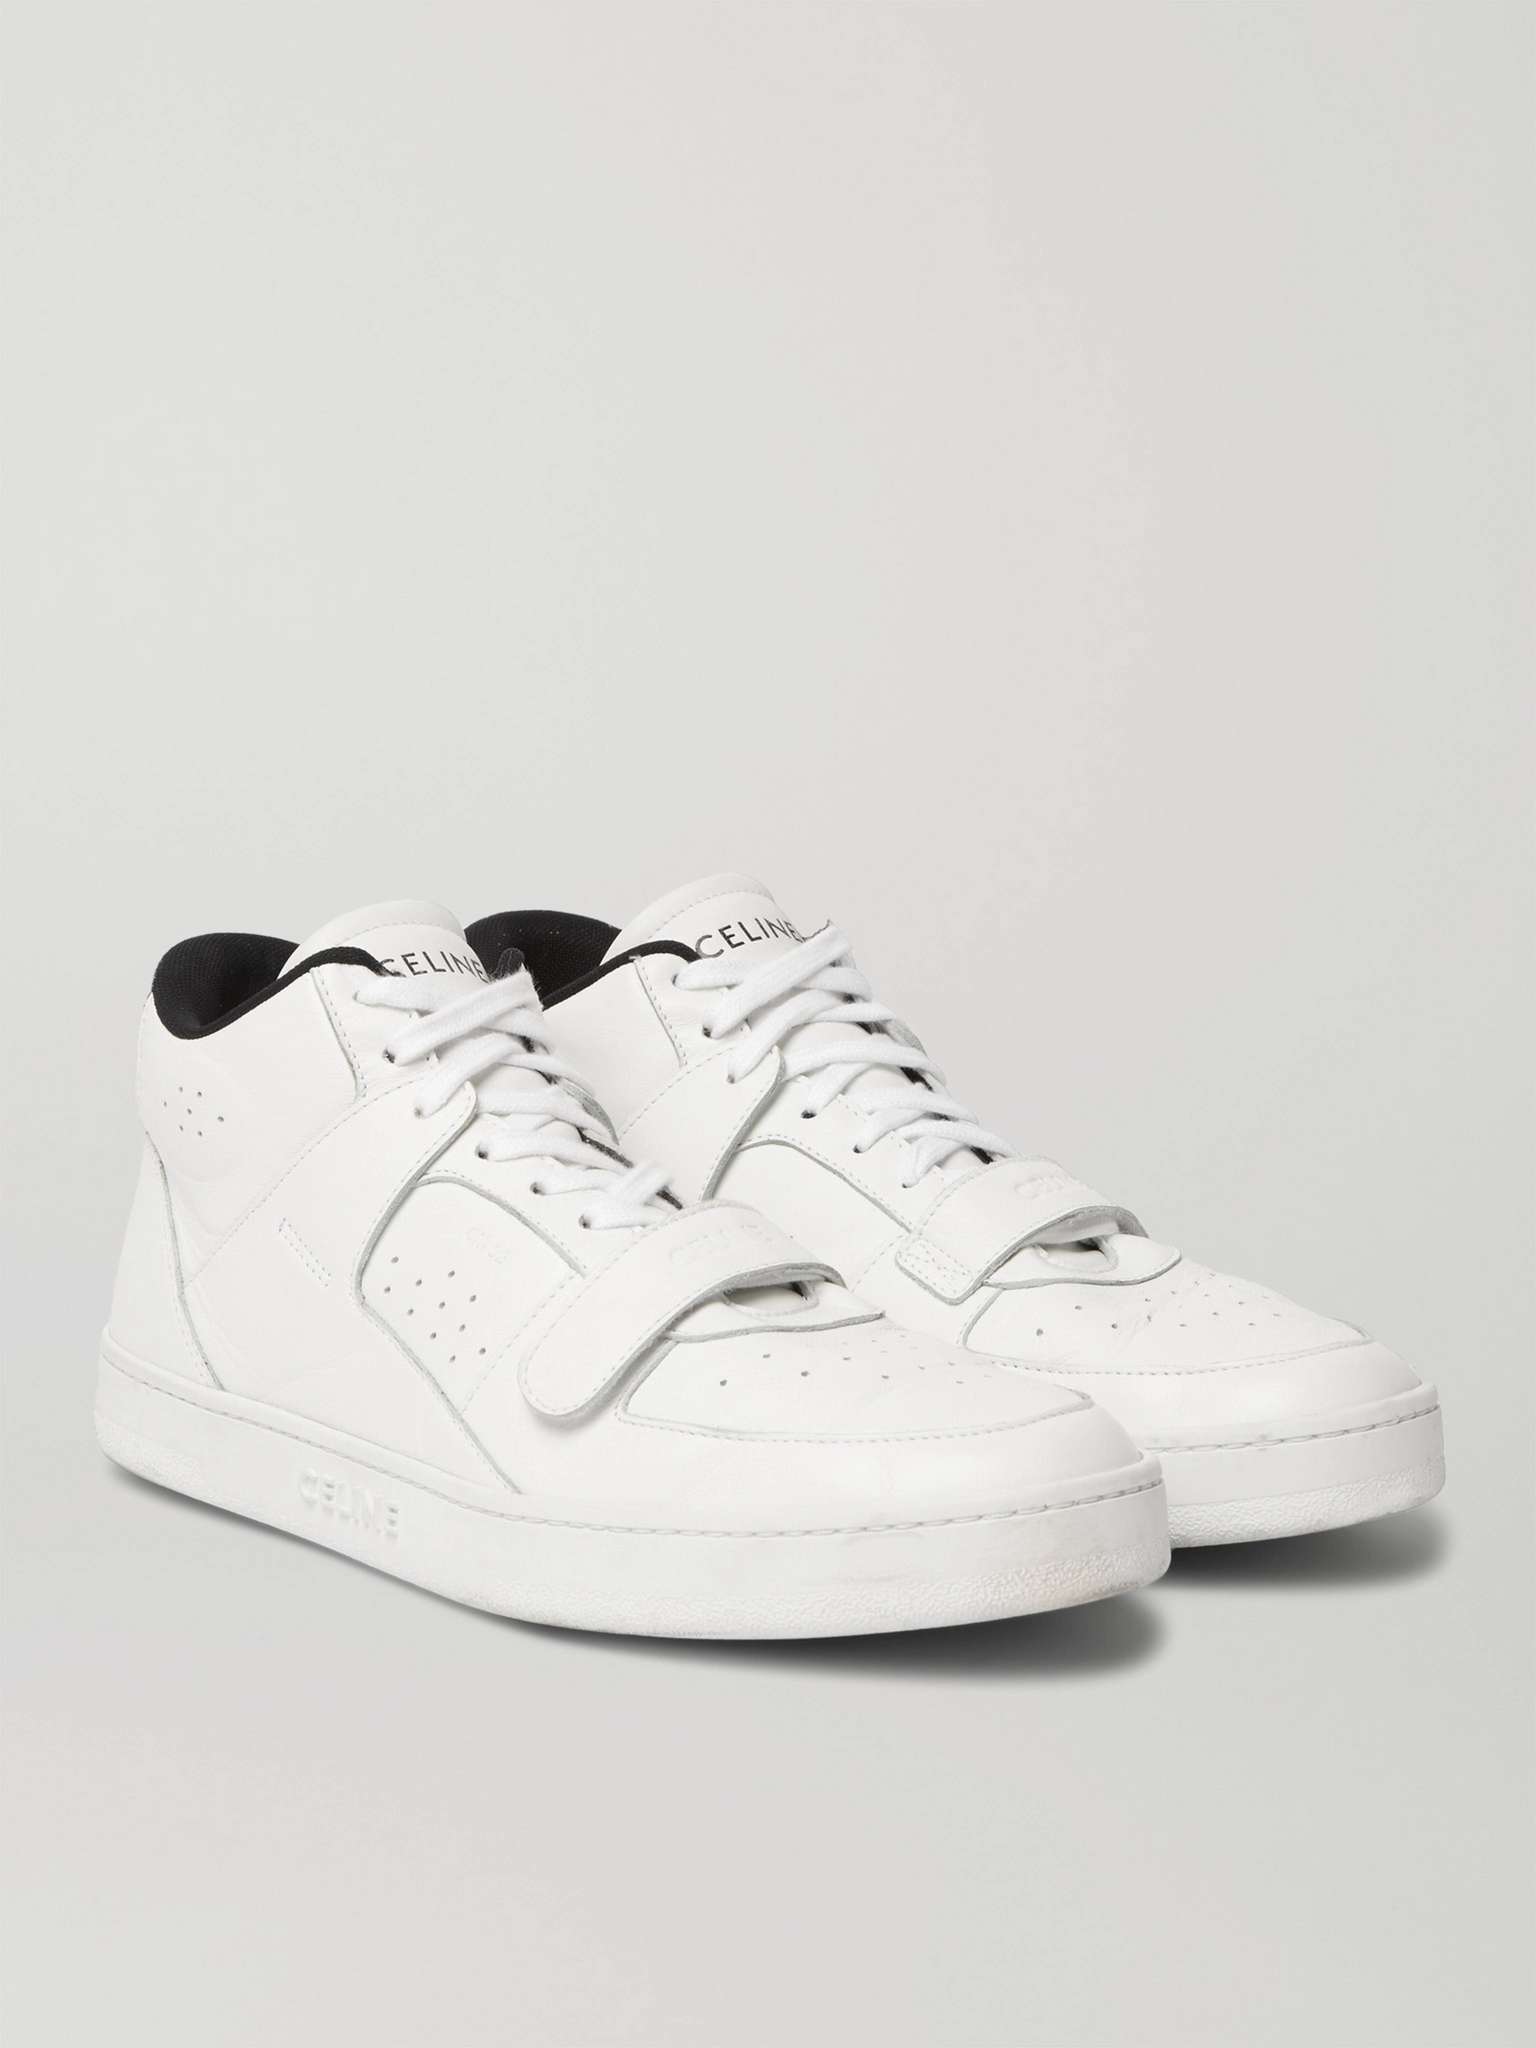 CELINE HOMME CT-02 Leather High-Top Sneakers for Men | MR PORTER